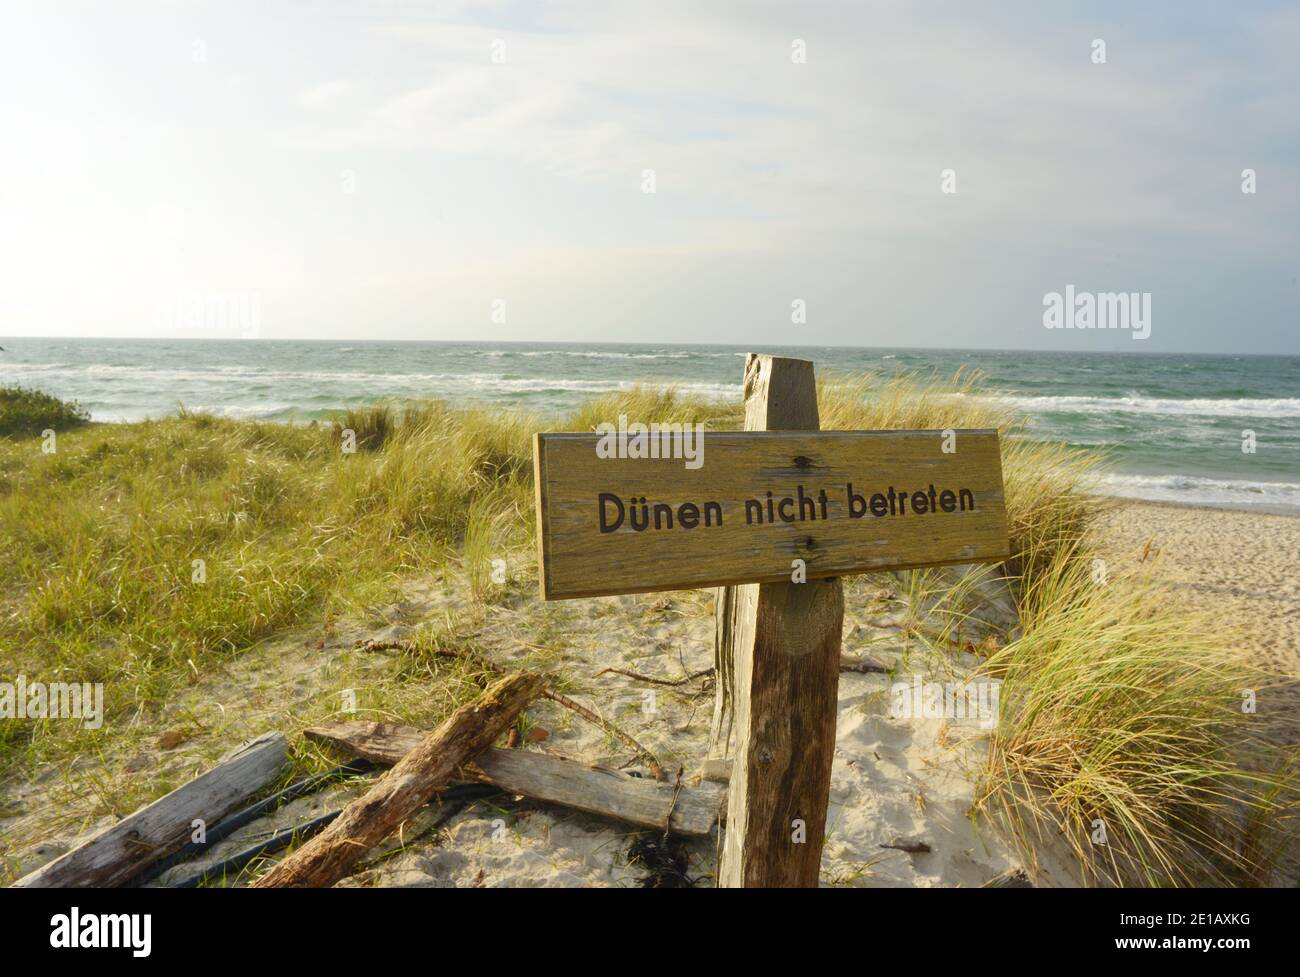 Sand dunes at the baltic sea with a sign in German Dünen nicht betreten engl no trespassing the dunes Stock Photo